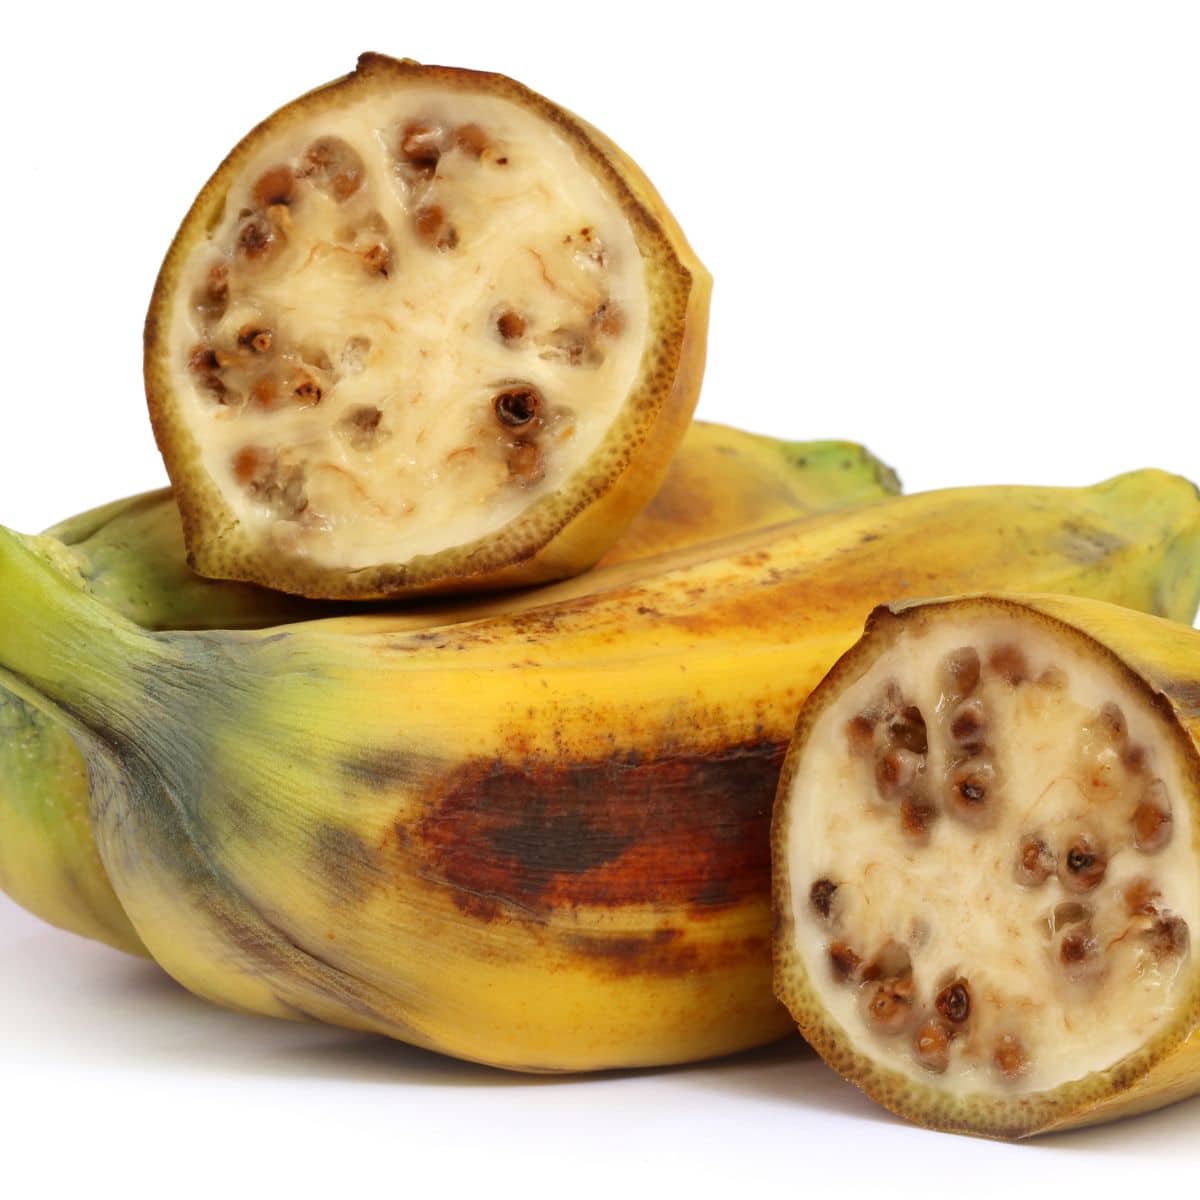 Wild bananas on a white background sliced open.